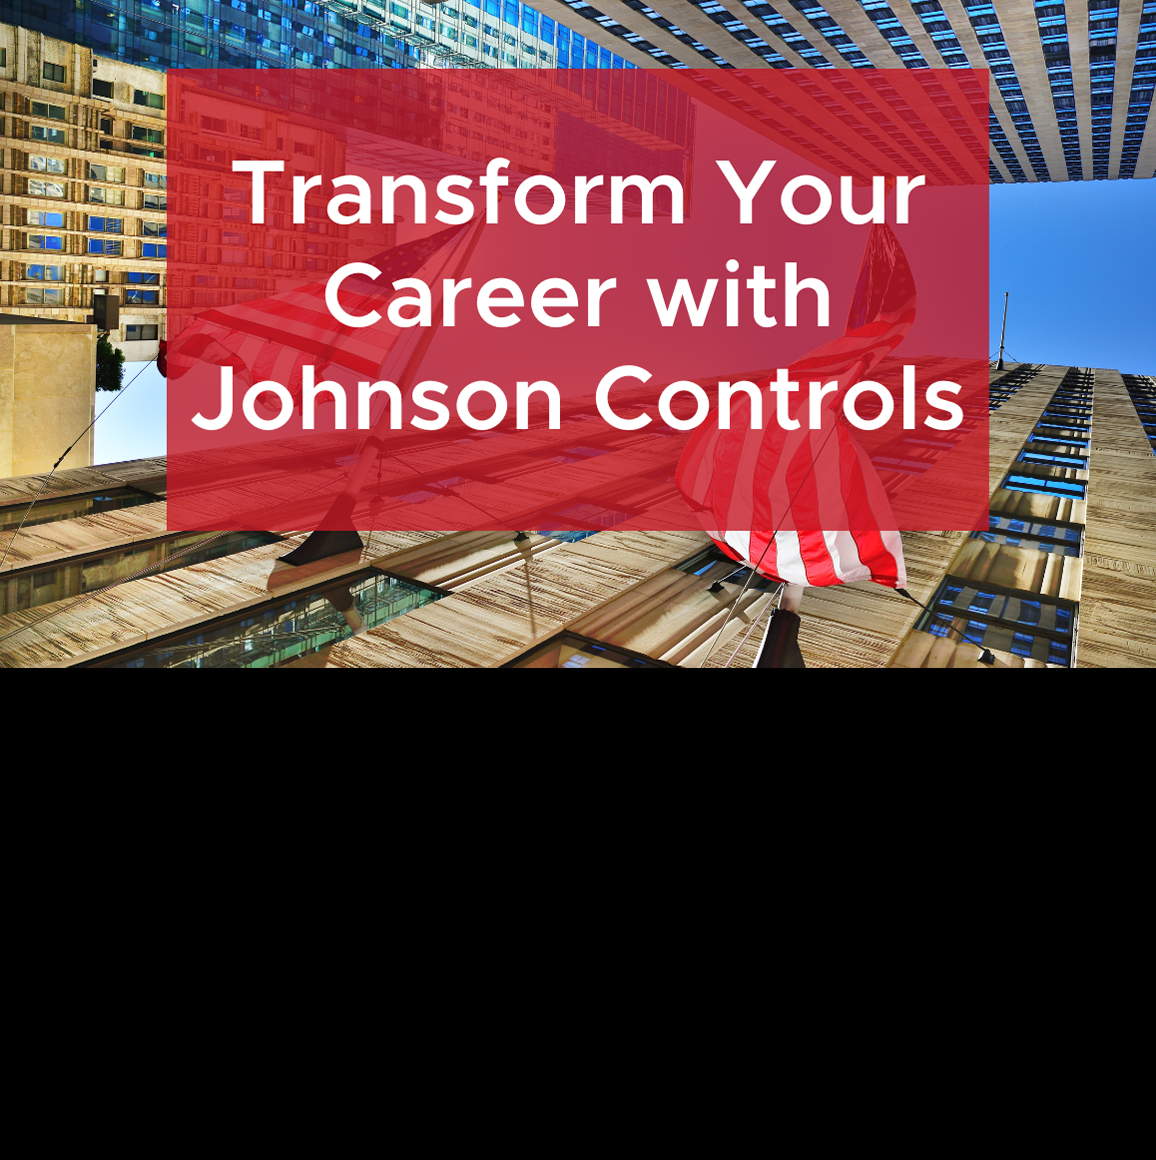 Transform Your Career with Johnson Controls